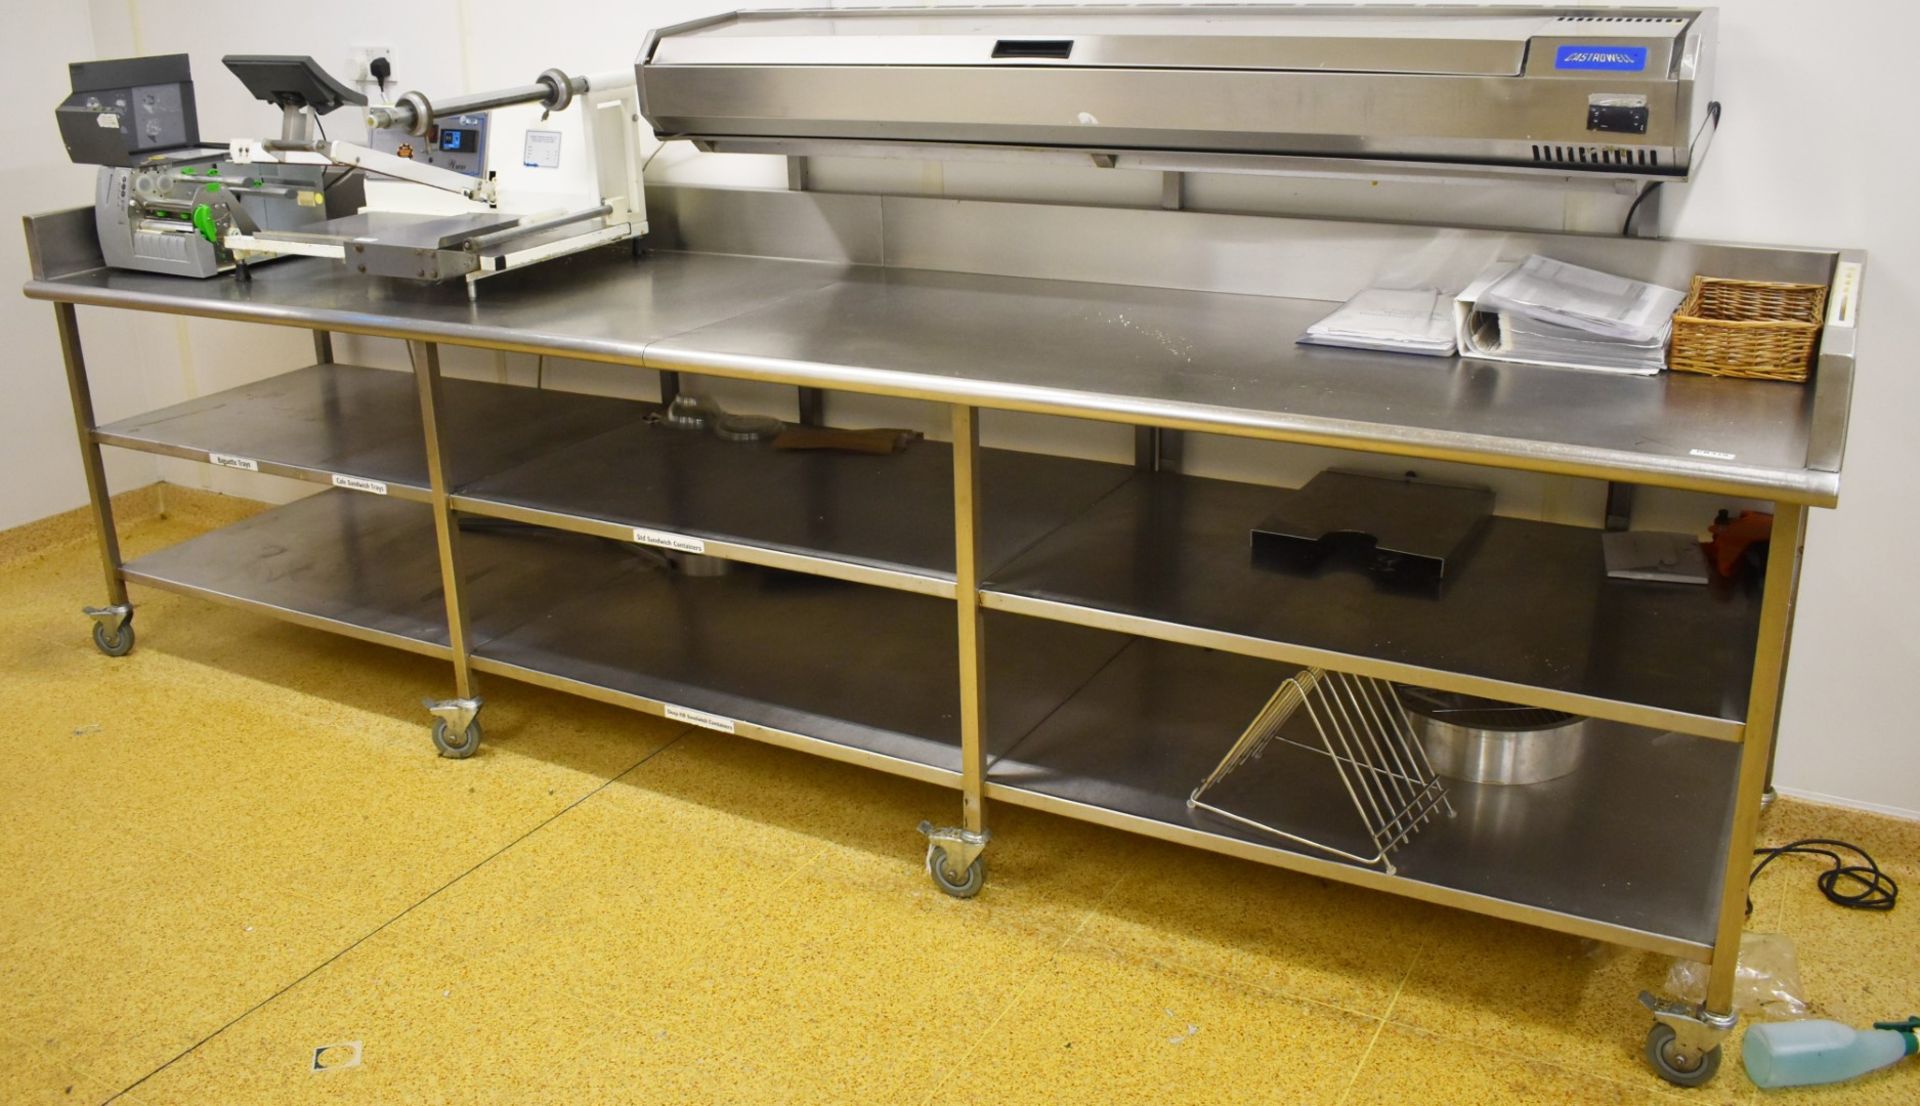 1 x Large Stainless Steel Prep Bench on Castors - Over 11ft in Length - Features Upstands and